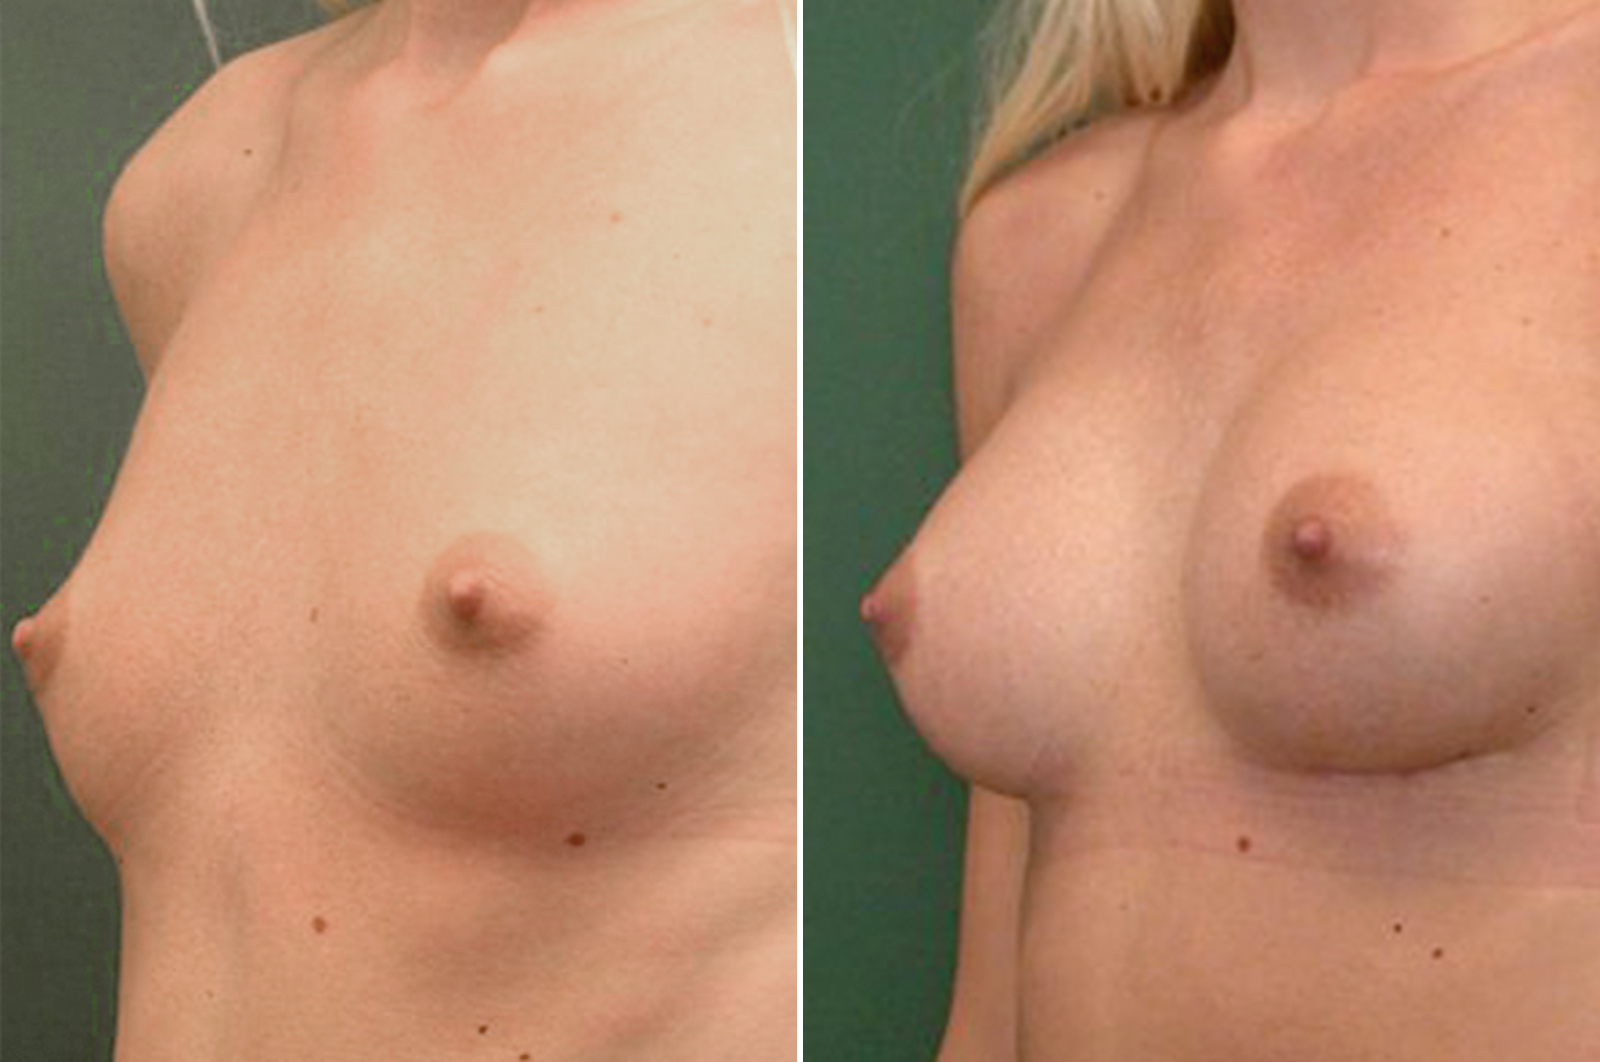  Body surgery breast augmentation before and after surgery in antwerp